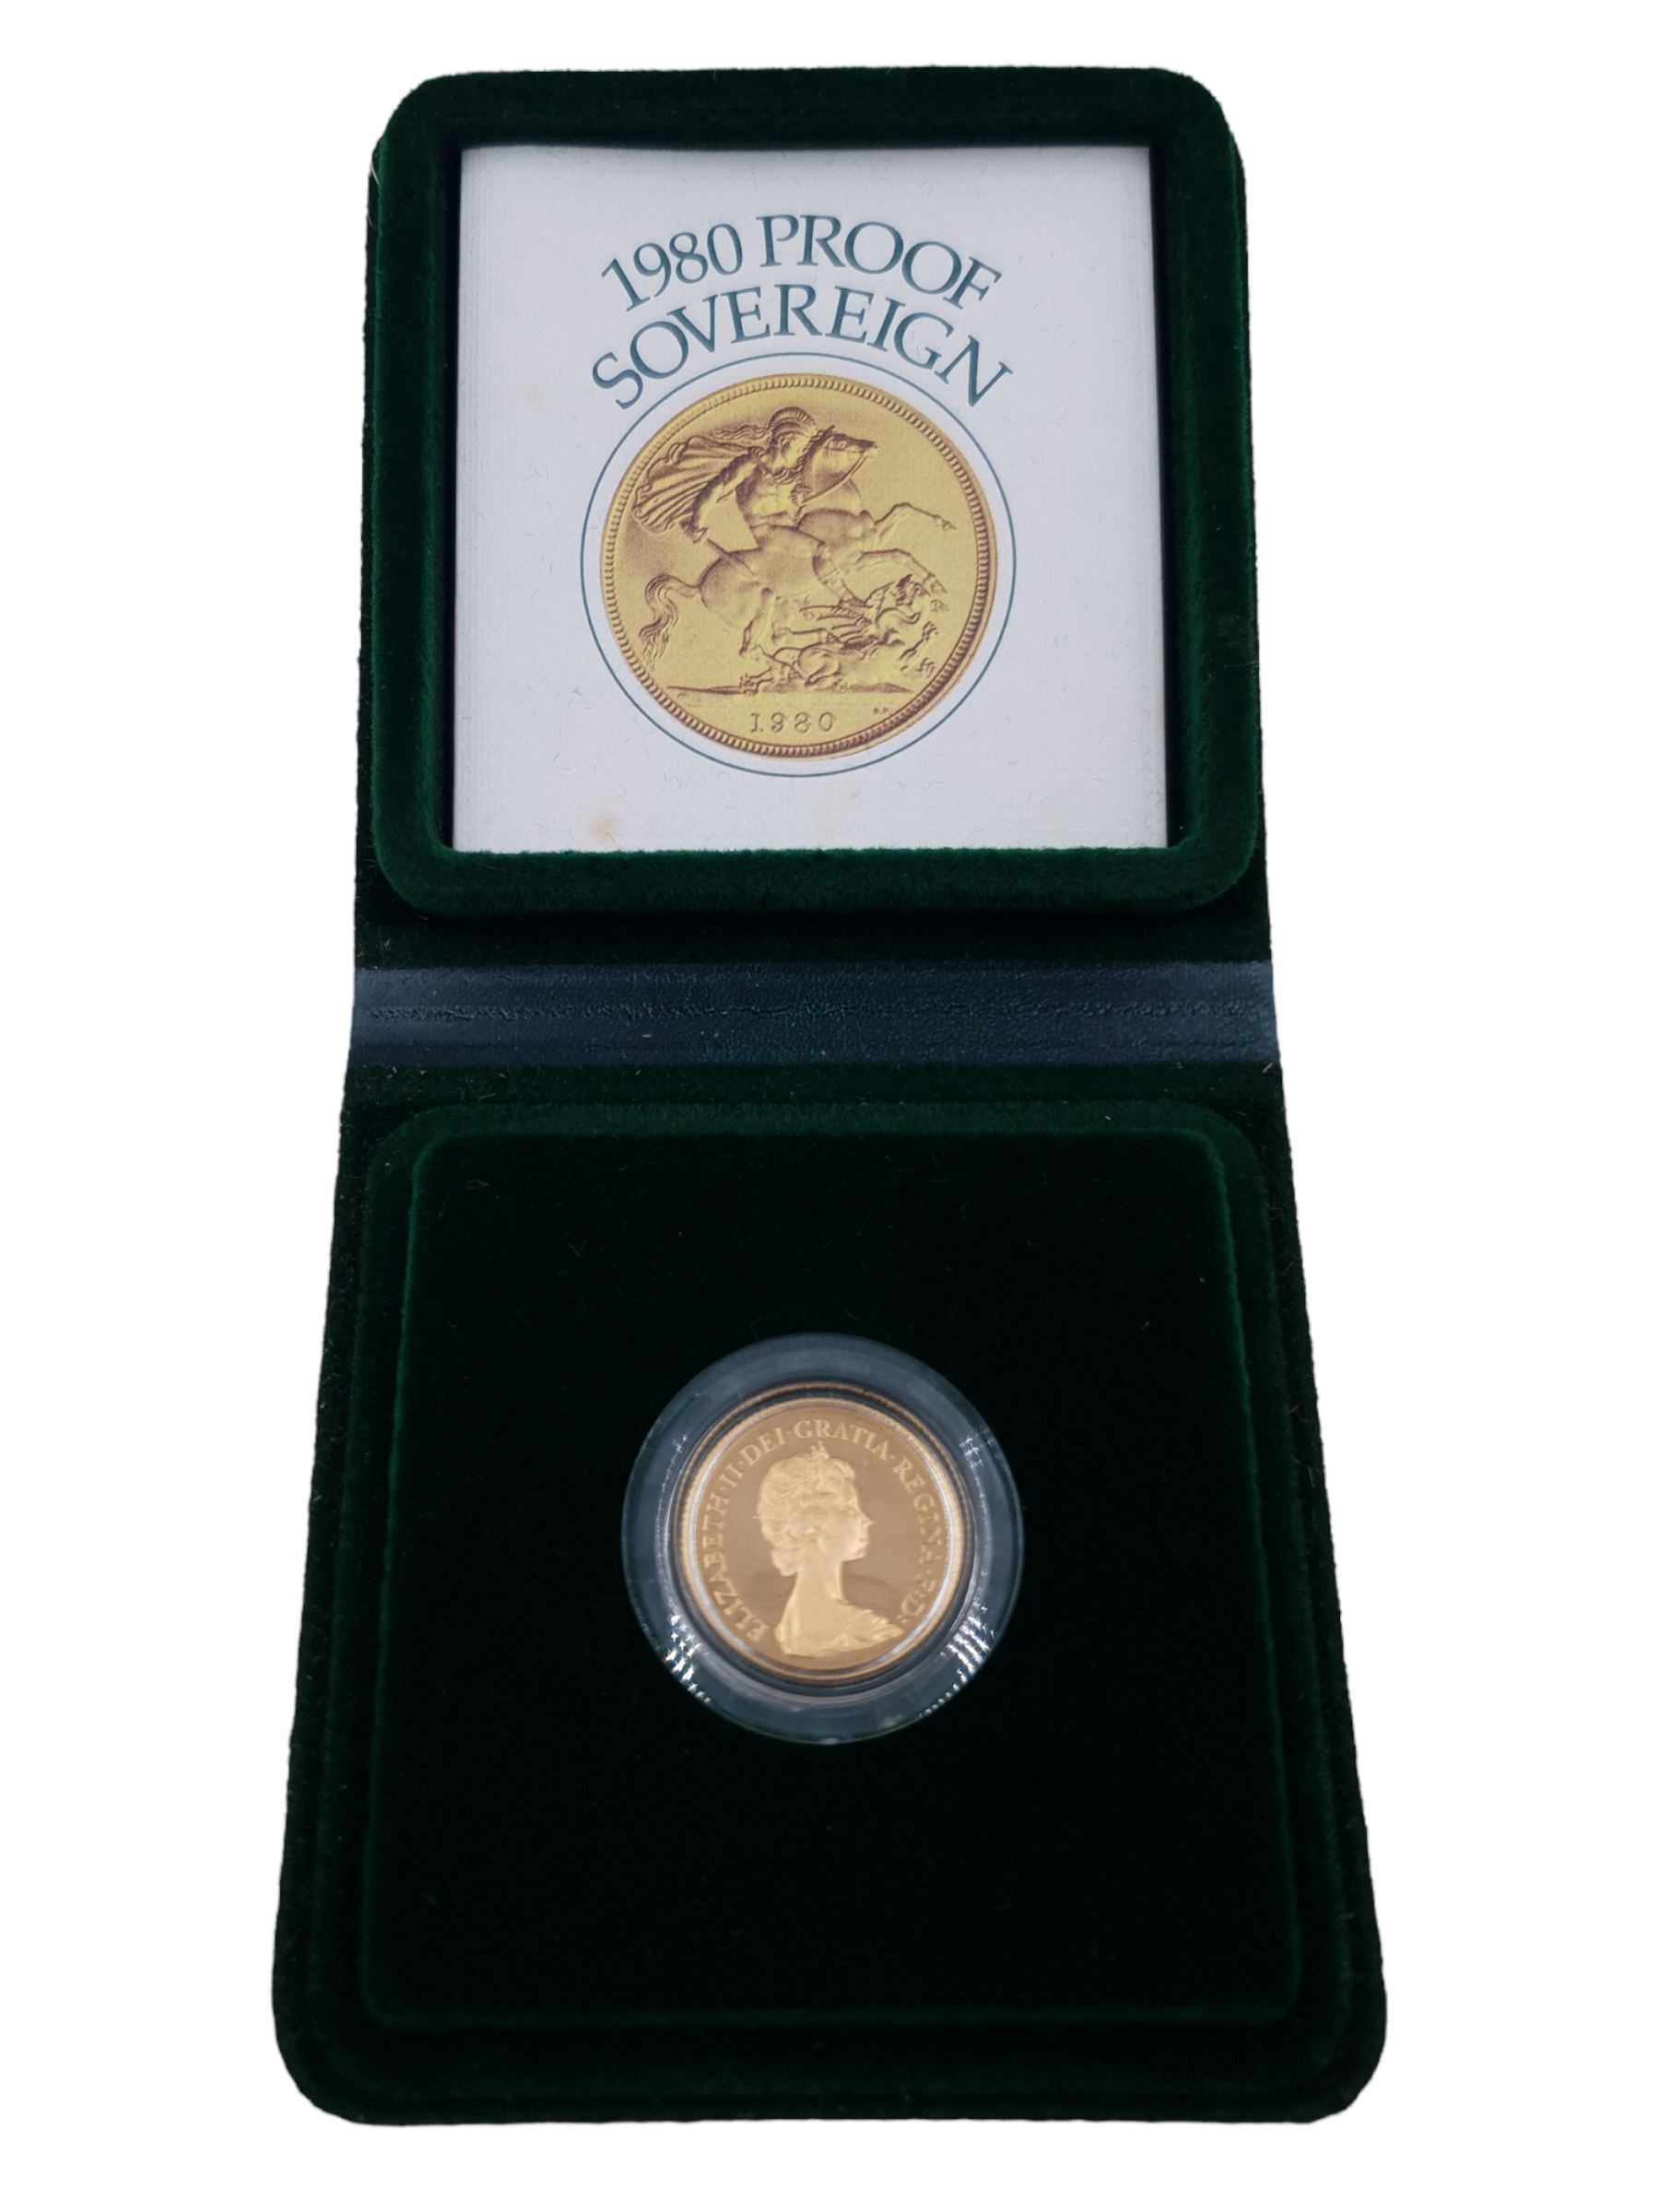 Queen Elizabeth II 1980 gold proof full sovereign coin - Image 2 of 3